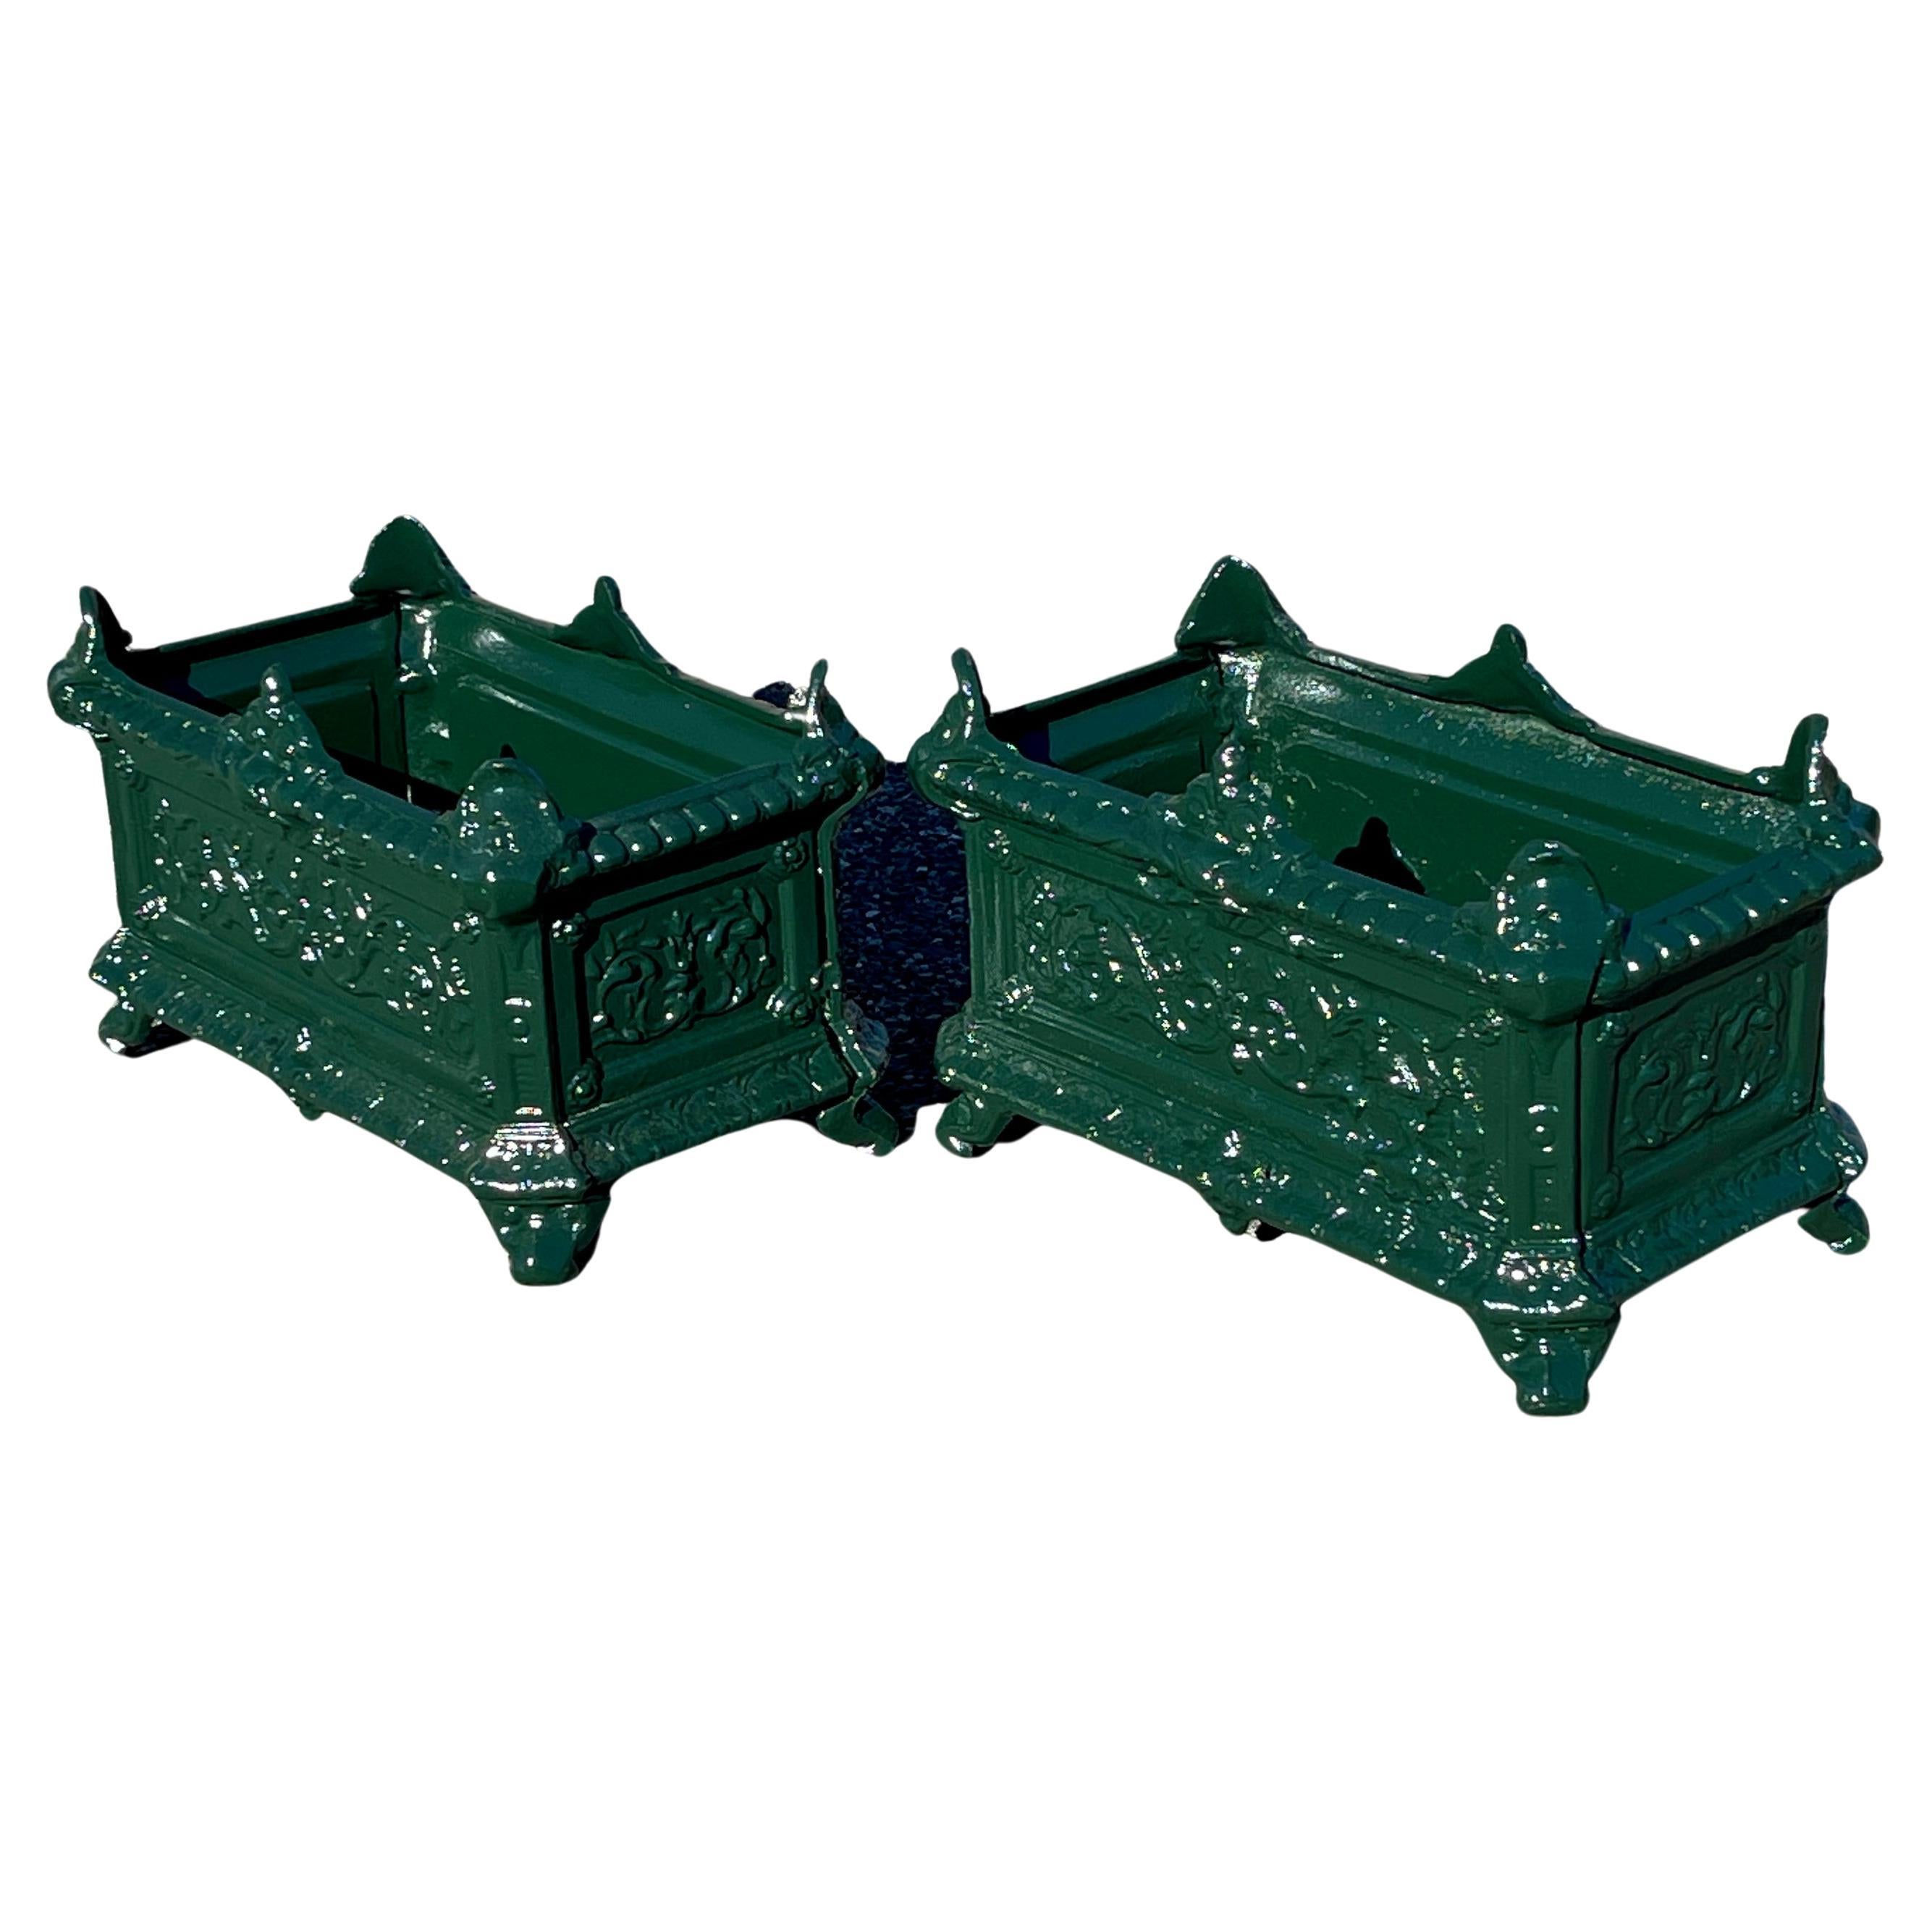 French pair of Belle Époque cast metal green jardinières garden planters.

Painted cast aluminum urns with an incredible modern green powder-coated finish. Raised on scroll feet, these charming planters feature elaborate molding and floral motifs,